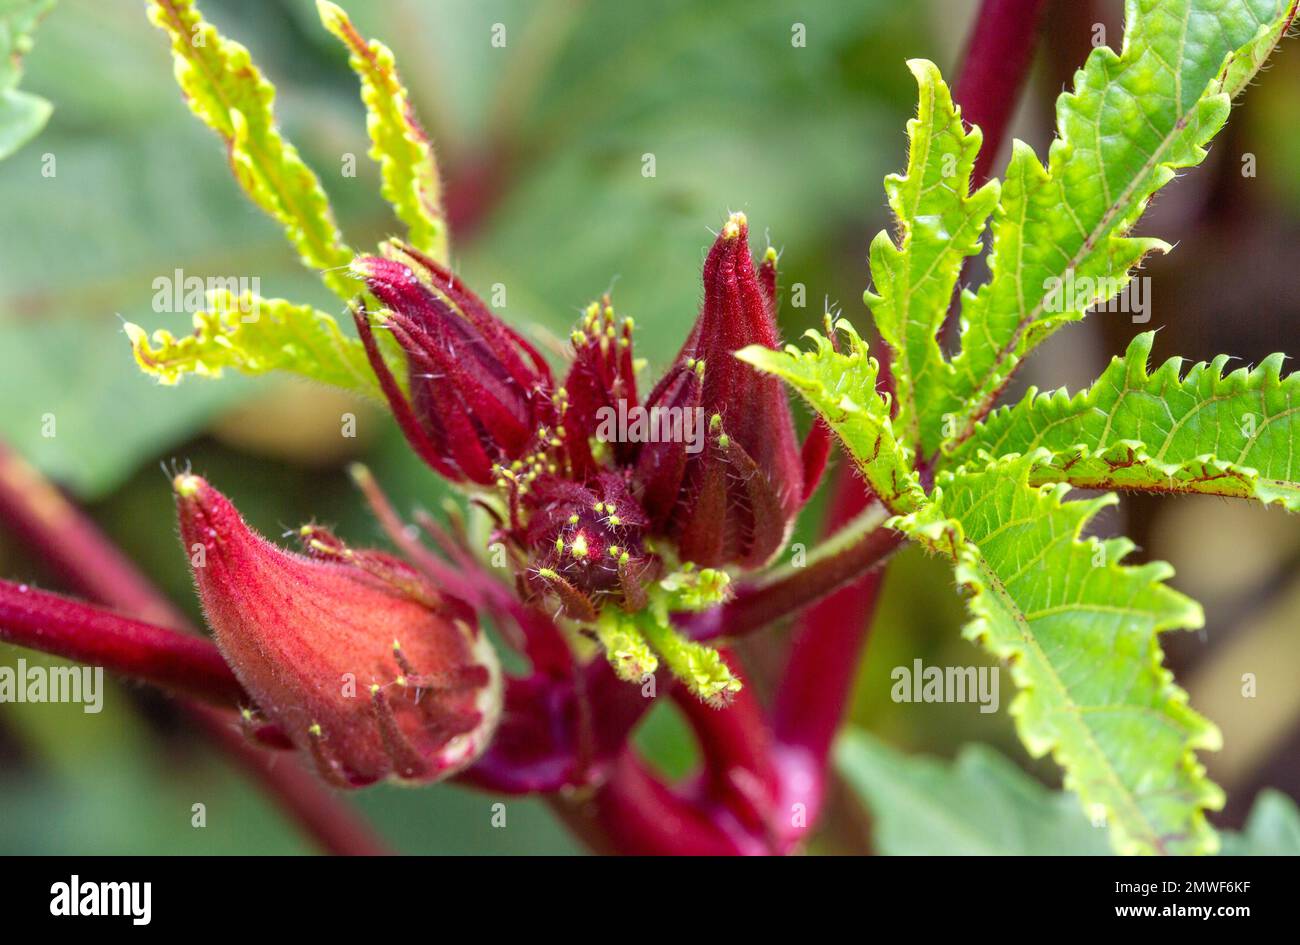 Okra, Abelmoschus esculentus, is a perennial flowering plant in the mallow family. Stock Photo